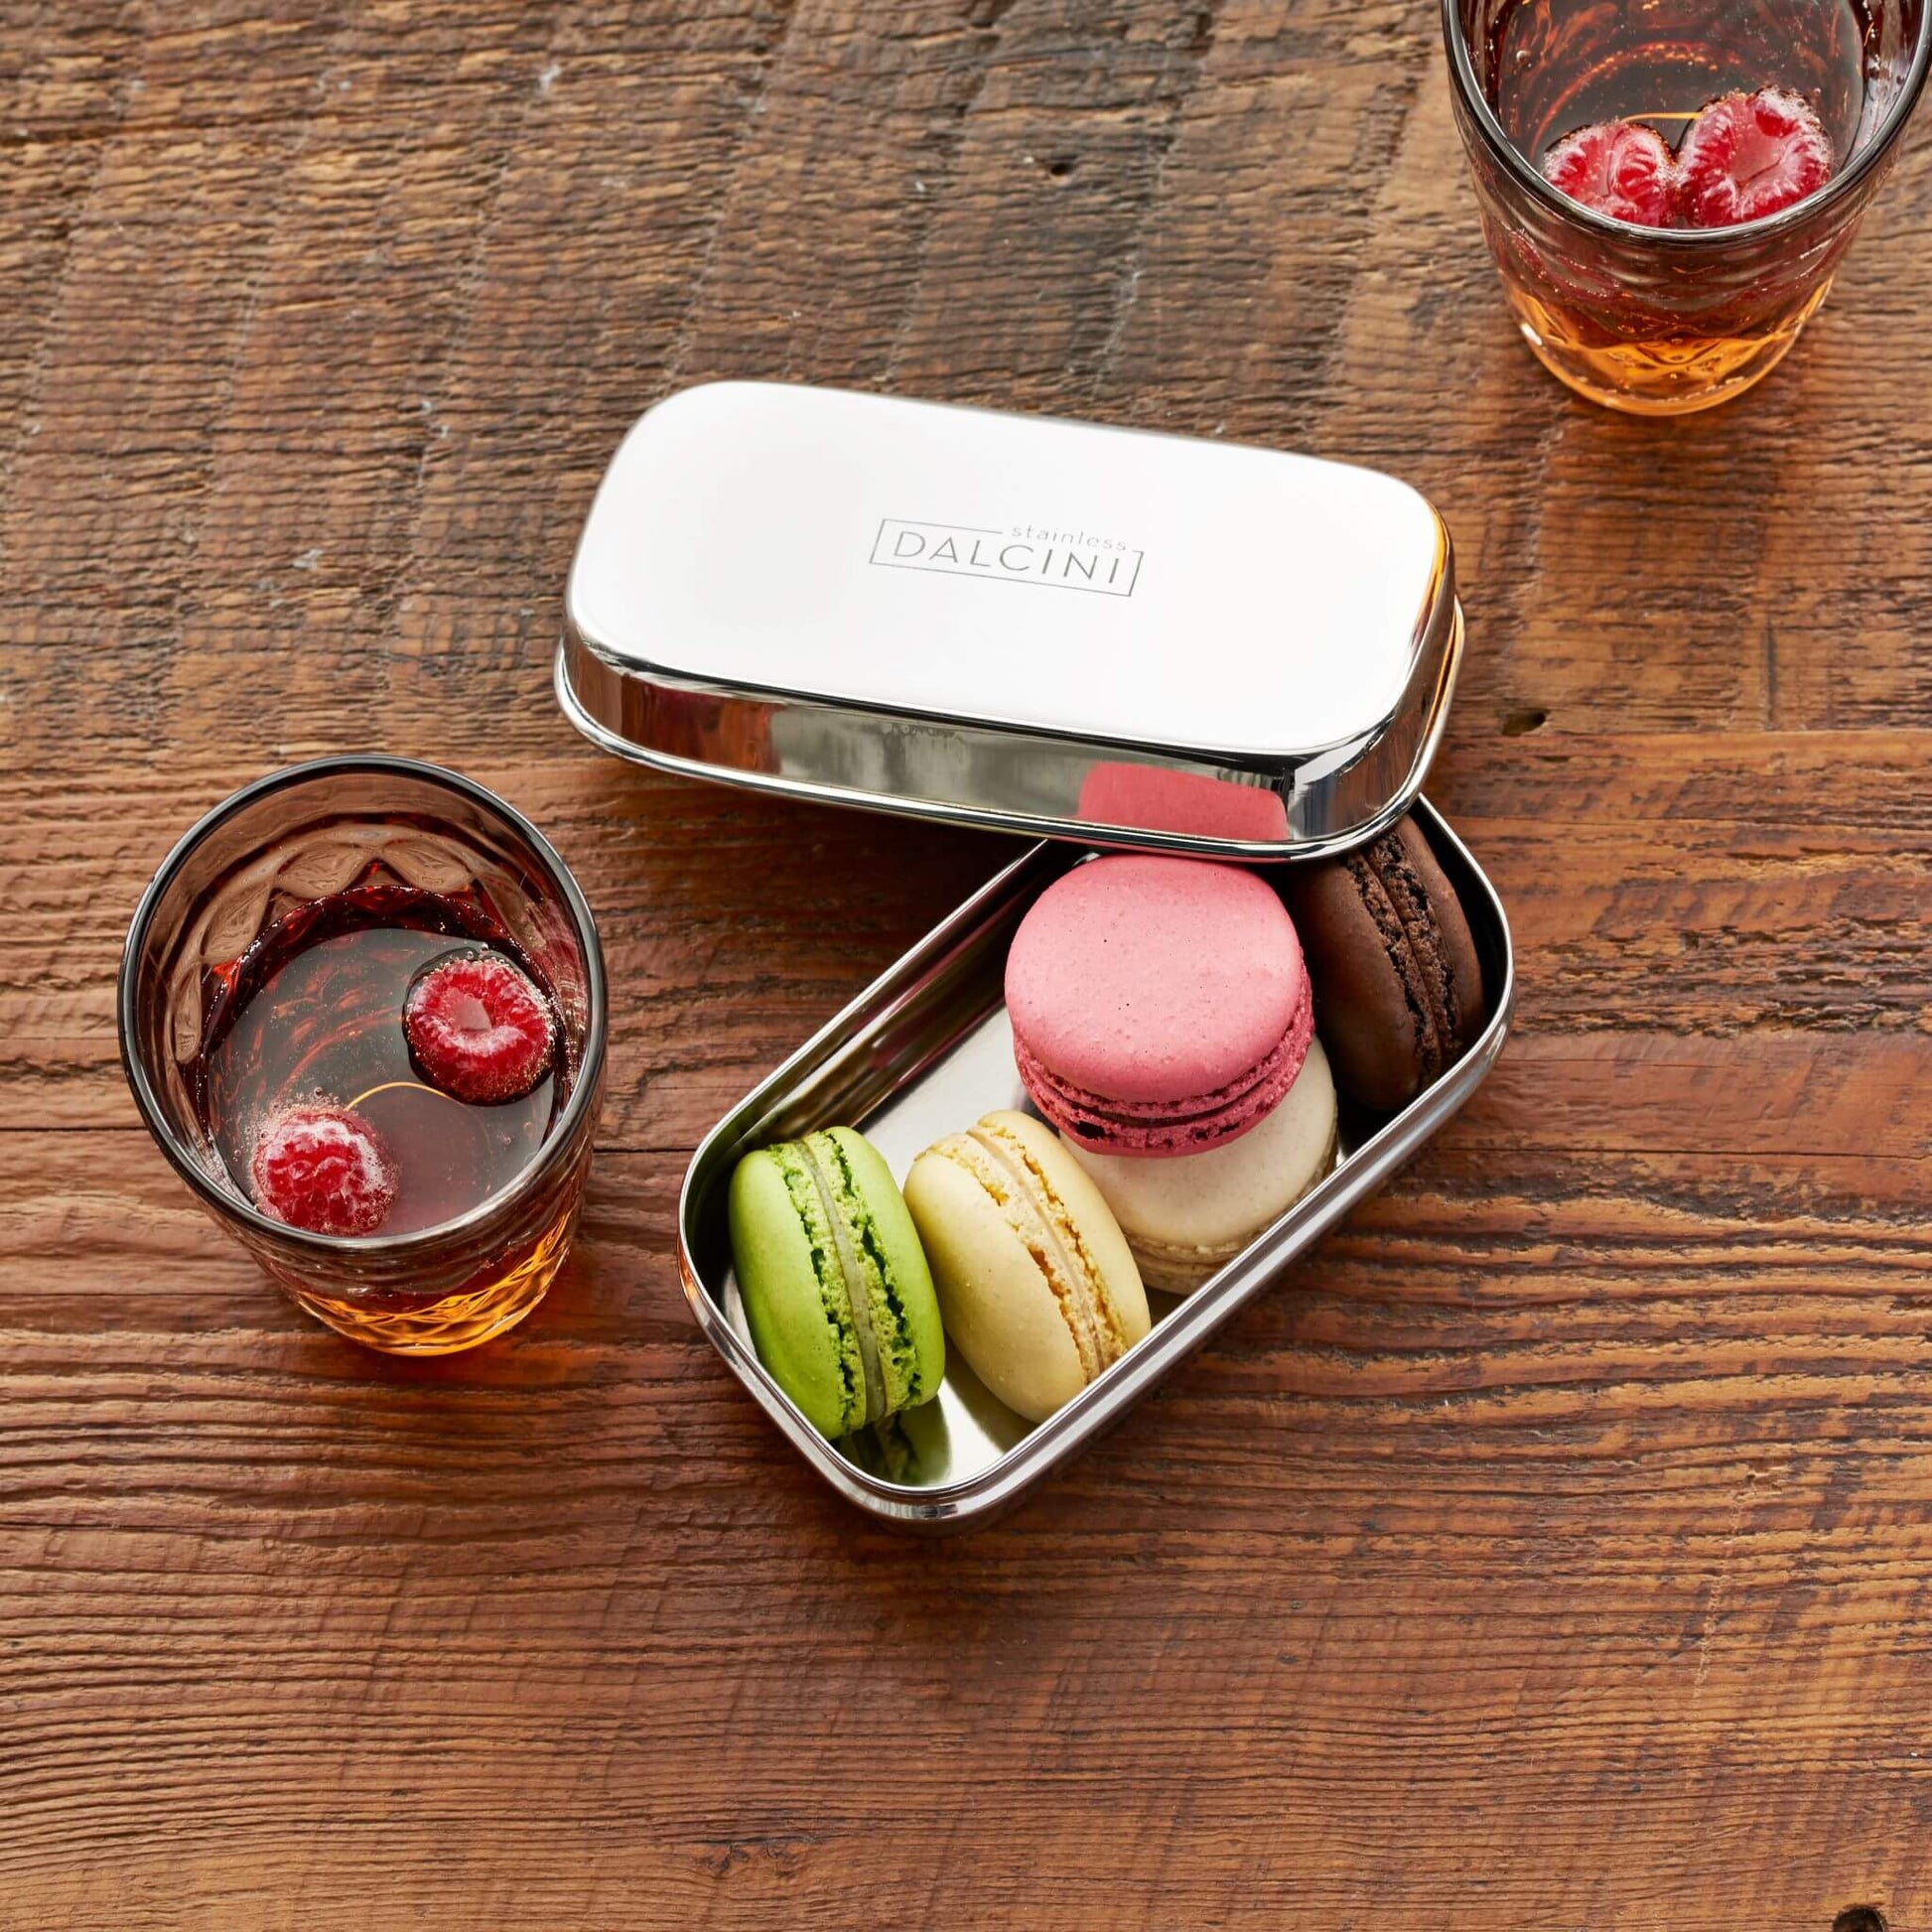 5 colourful macarons in stainless steel snack box next to glass of iced tea with raspberries